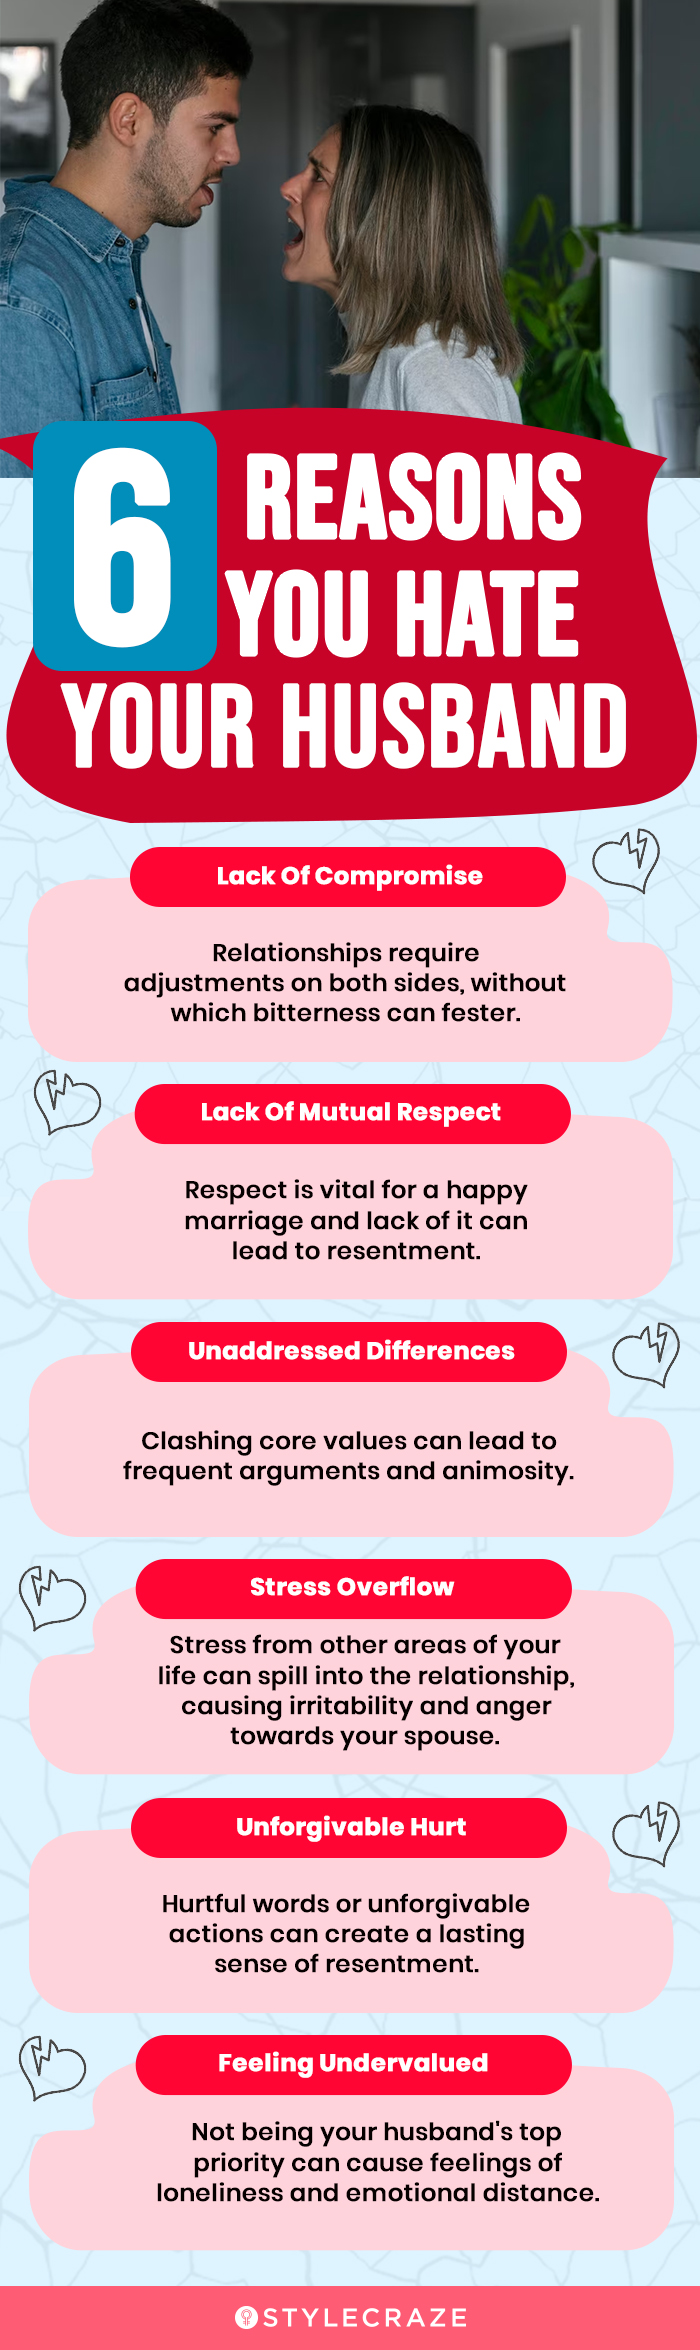 6 reasons you hate your husband (infographic)